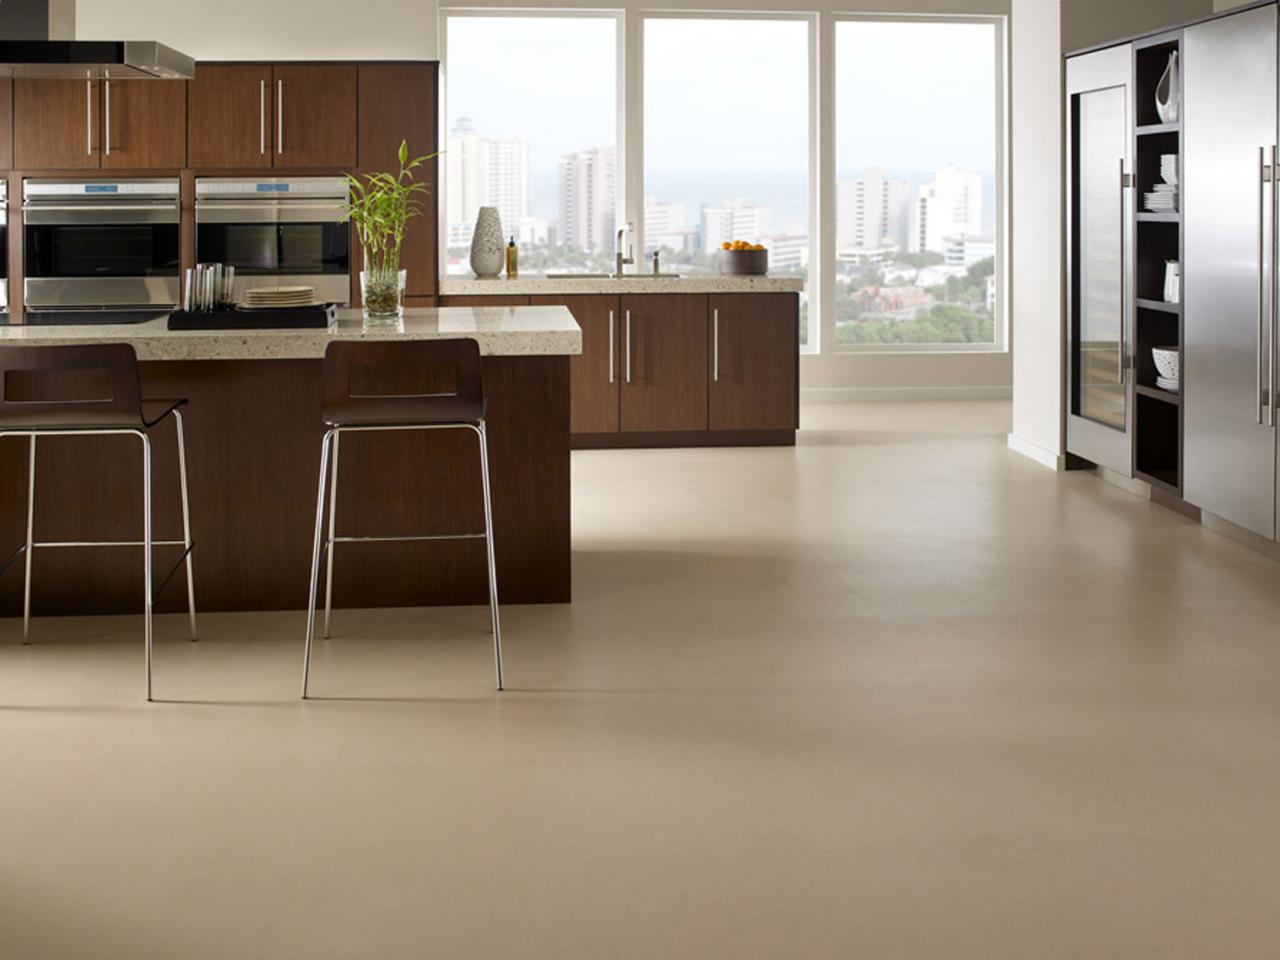 Can You Use Rubber Floor Tiles In Kitchen